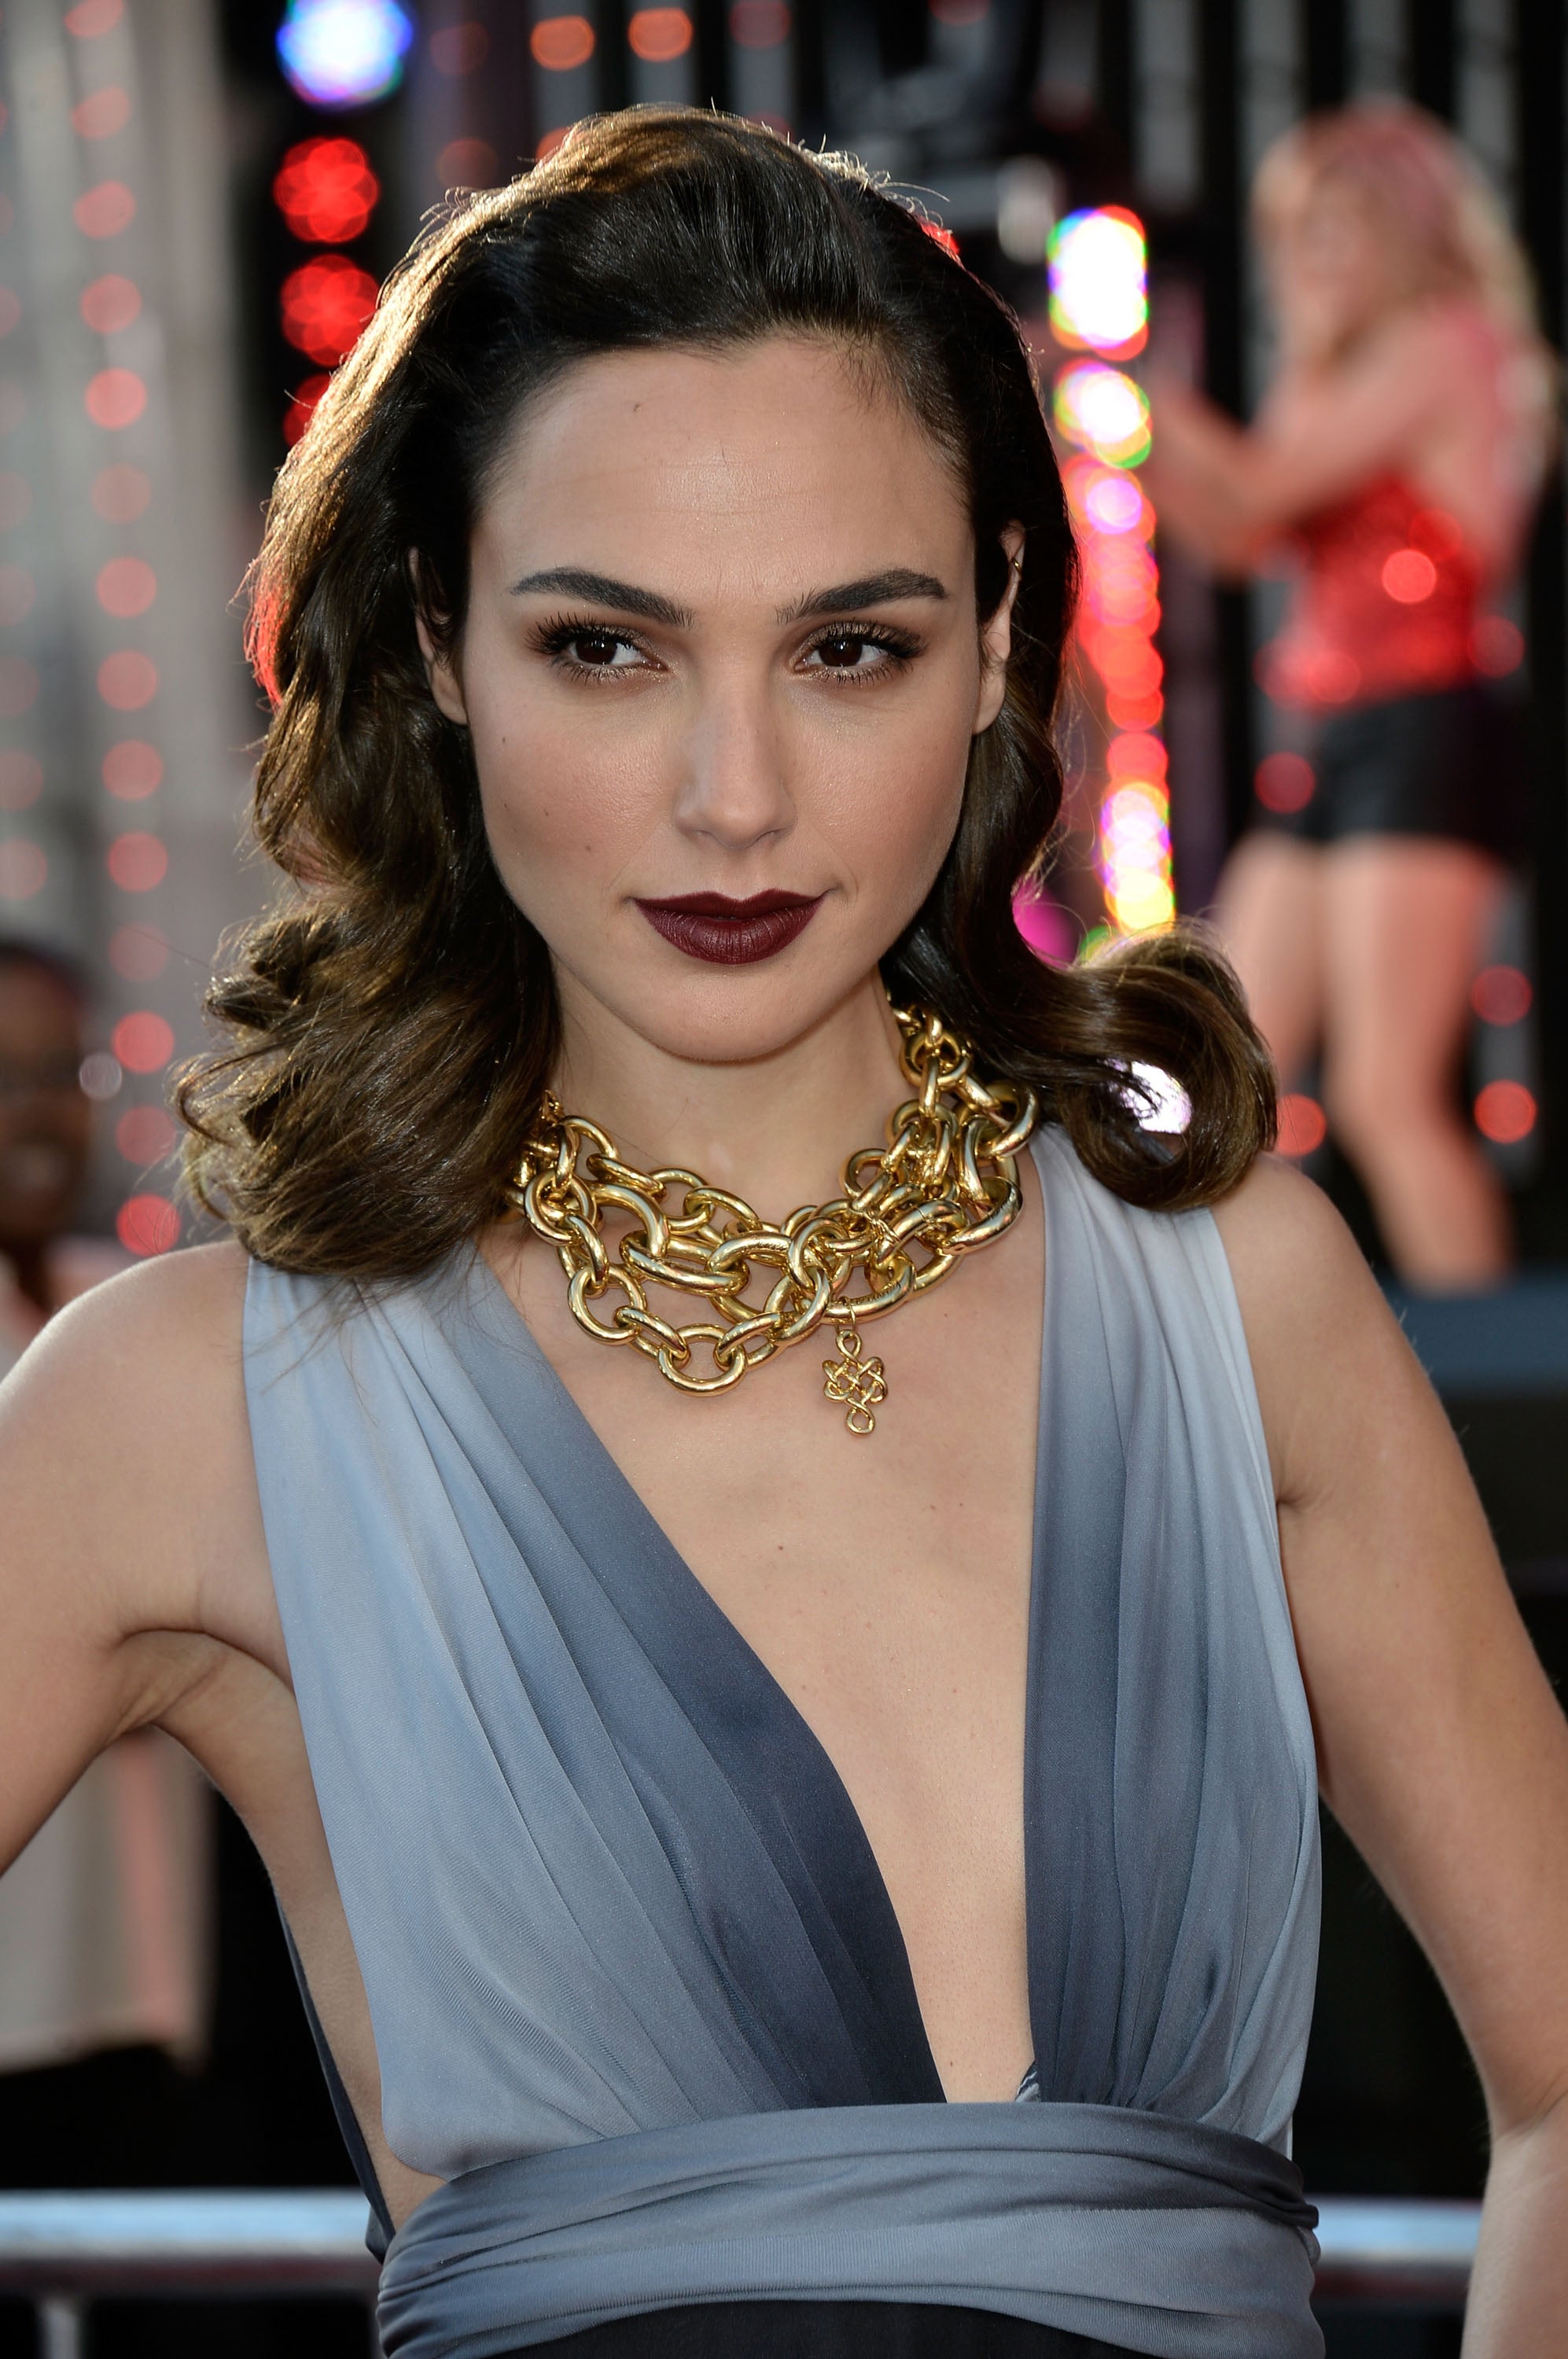 Who is Gal Gadot? Wonder Woman actress, former Miss Israel and Gucci model